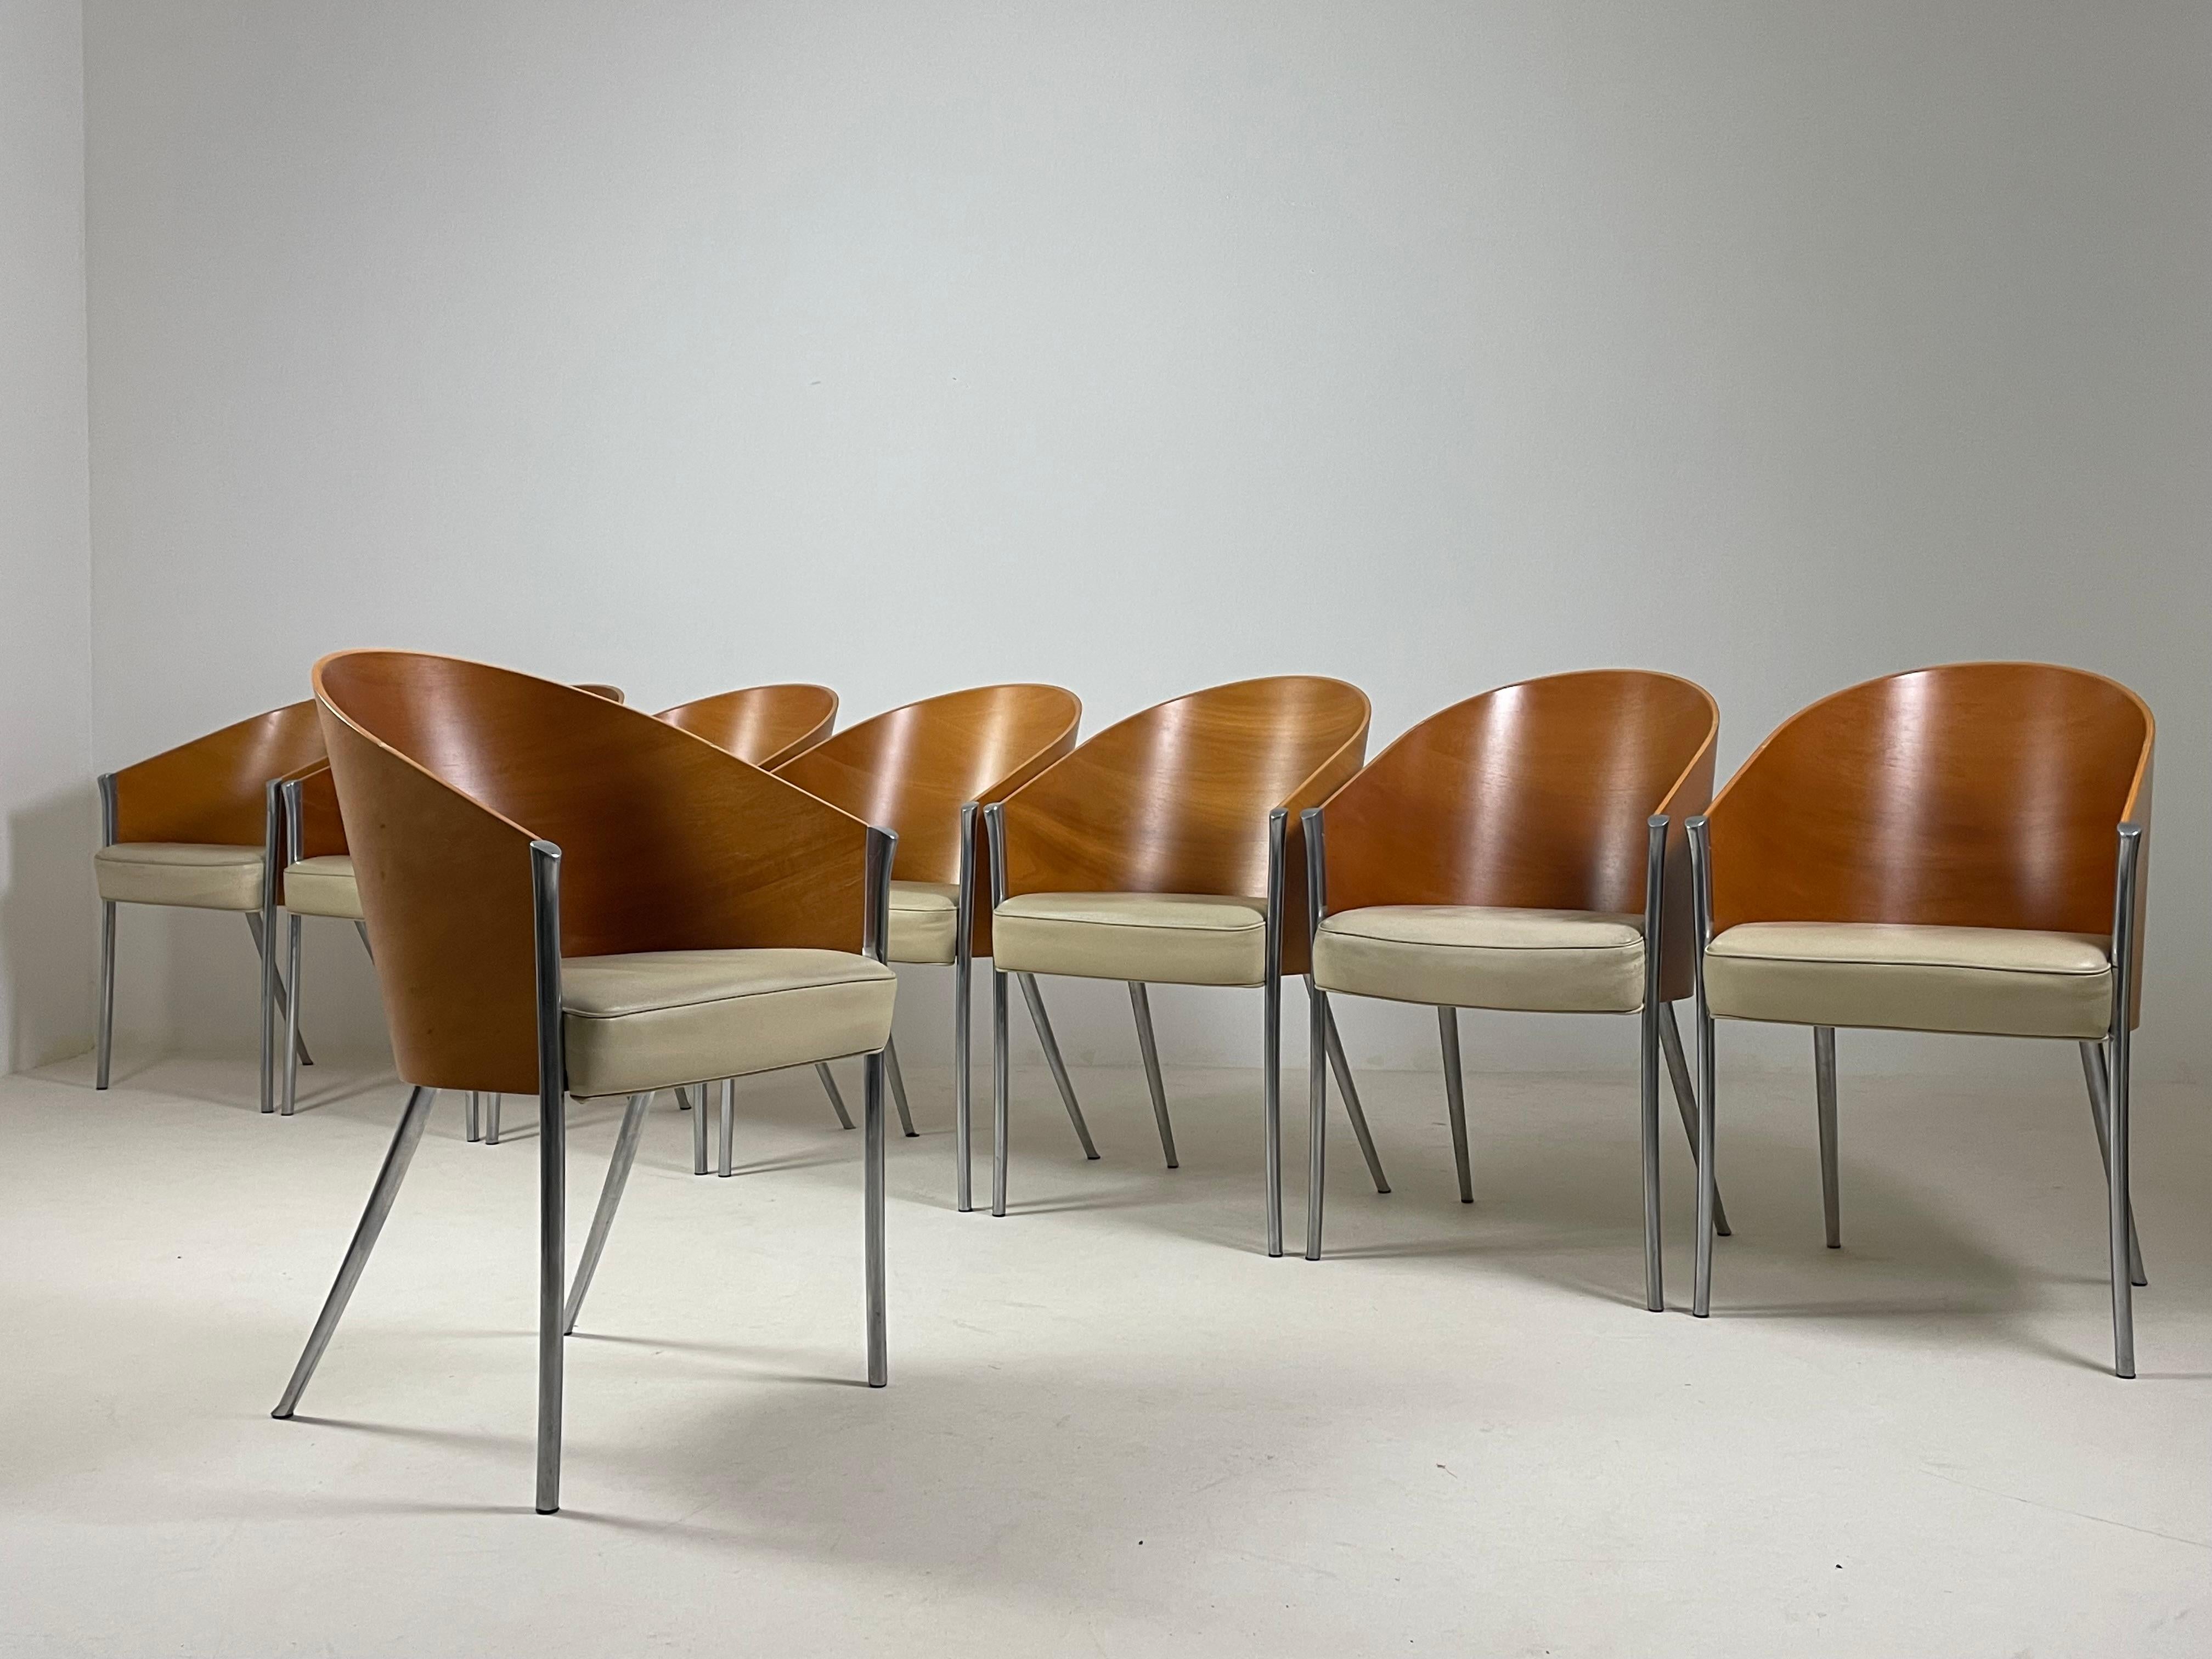 Set of 8 King Costes Model Armchairs by designer Philippe Starck and produced by Aleph/driade in the 1990s. Base in polished cast aluminum. Bultex foam seat covered in ivory cowhide leather. Molded wood back with mahogany facing. Recurring signs of